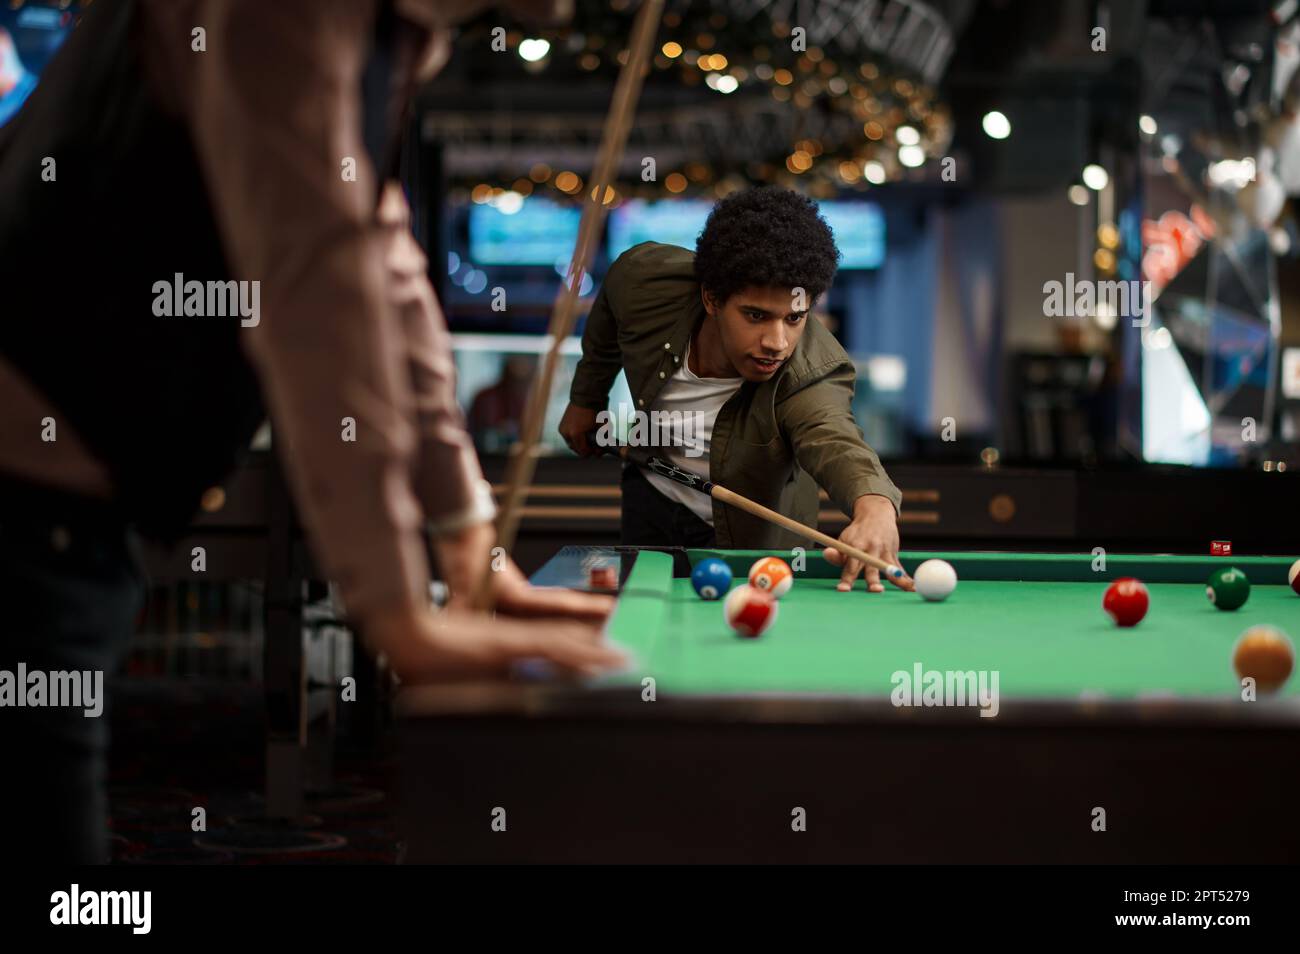 Billiards game. young friends playing pool together Stock Photo - Alamy